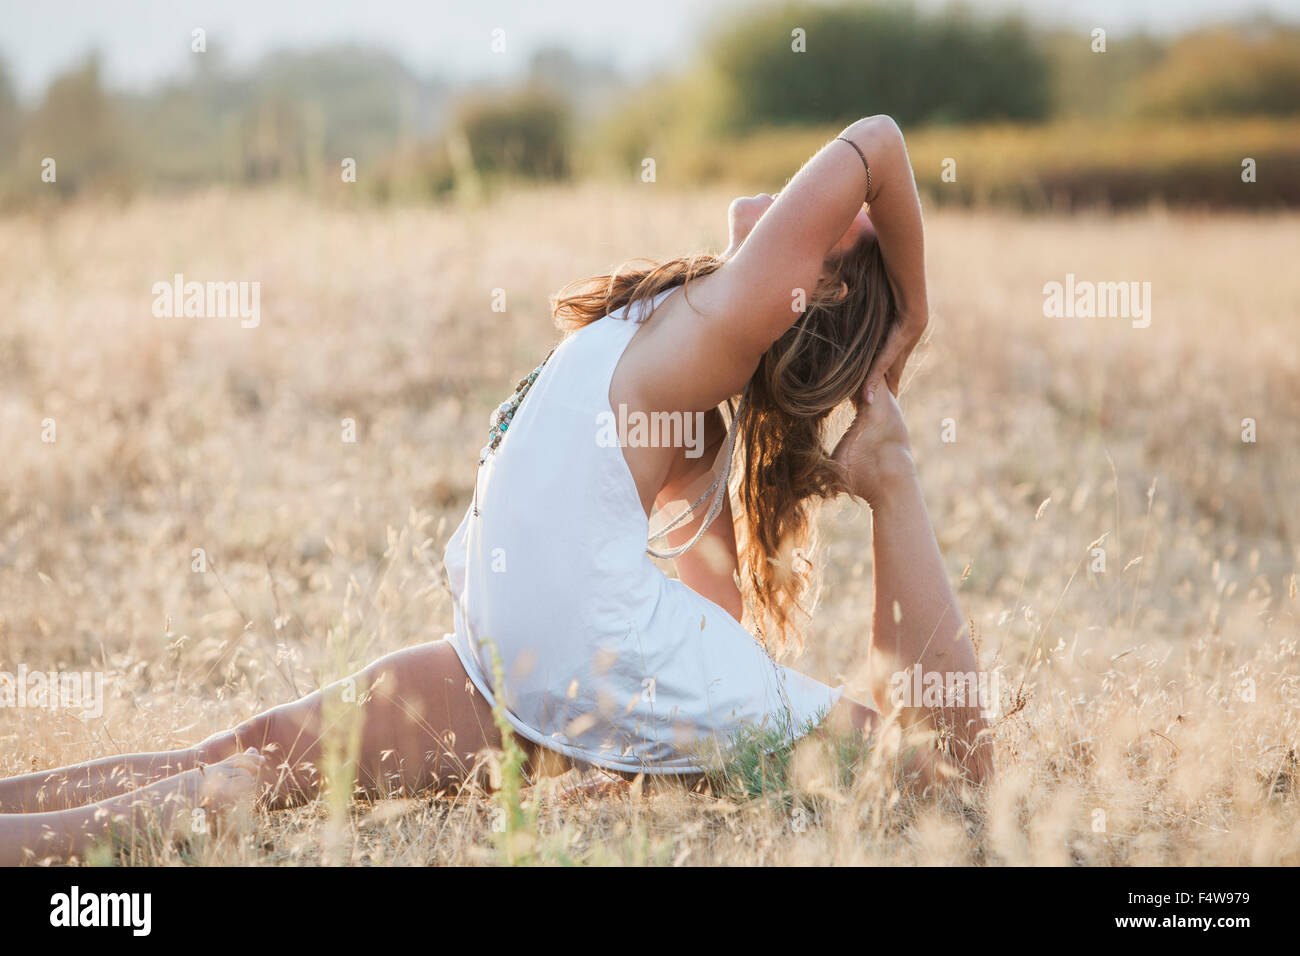 Boho woman in royal king pigeon pose in sunny rural field Stock Photo